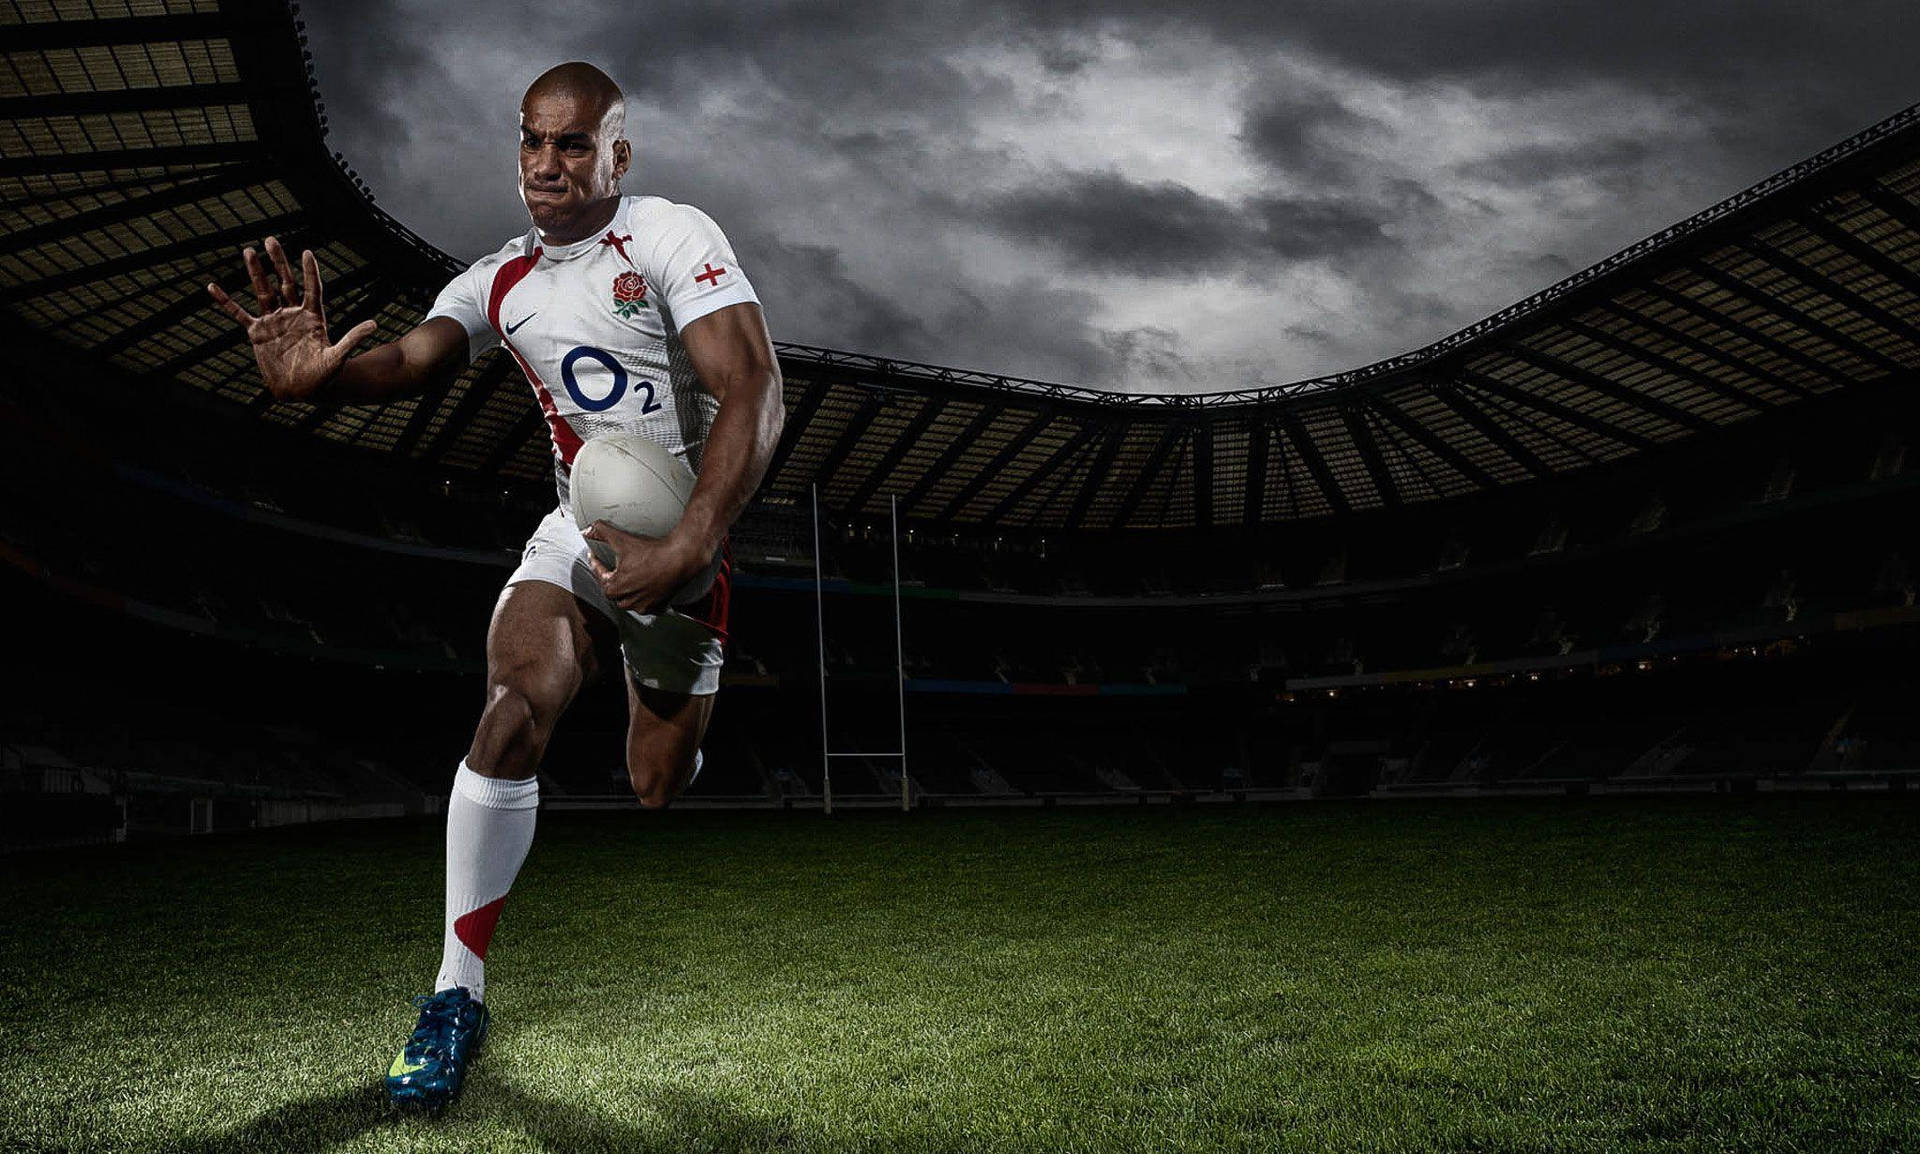 England National Rugby Photography